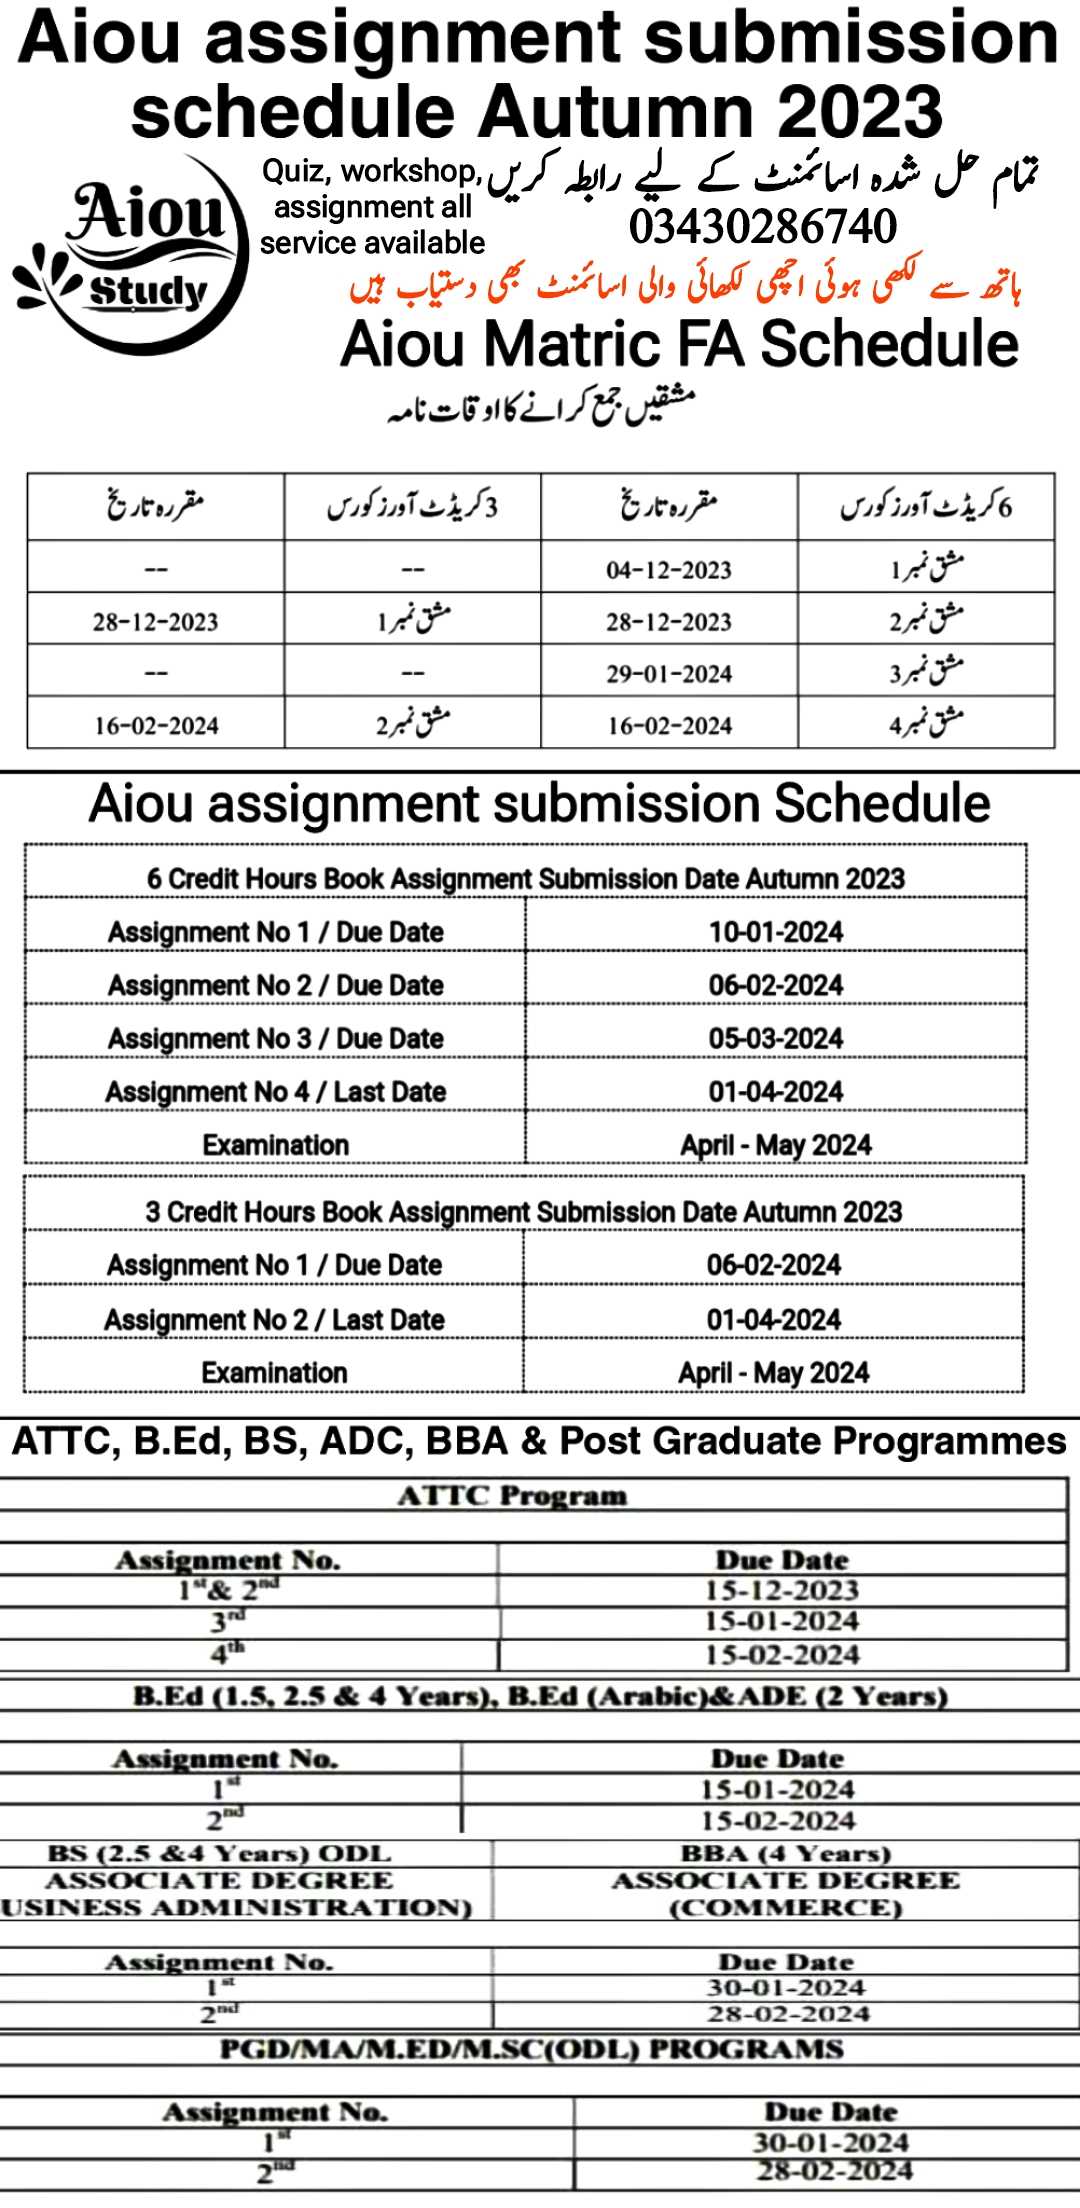 aiou assignment submission schedule Autumn 2023